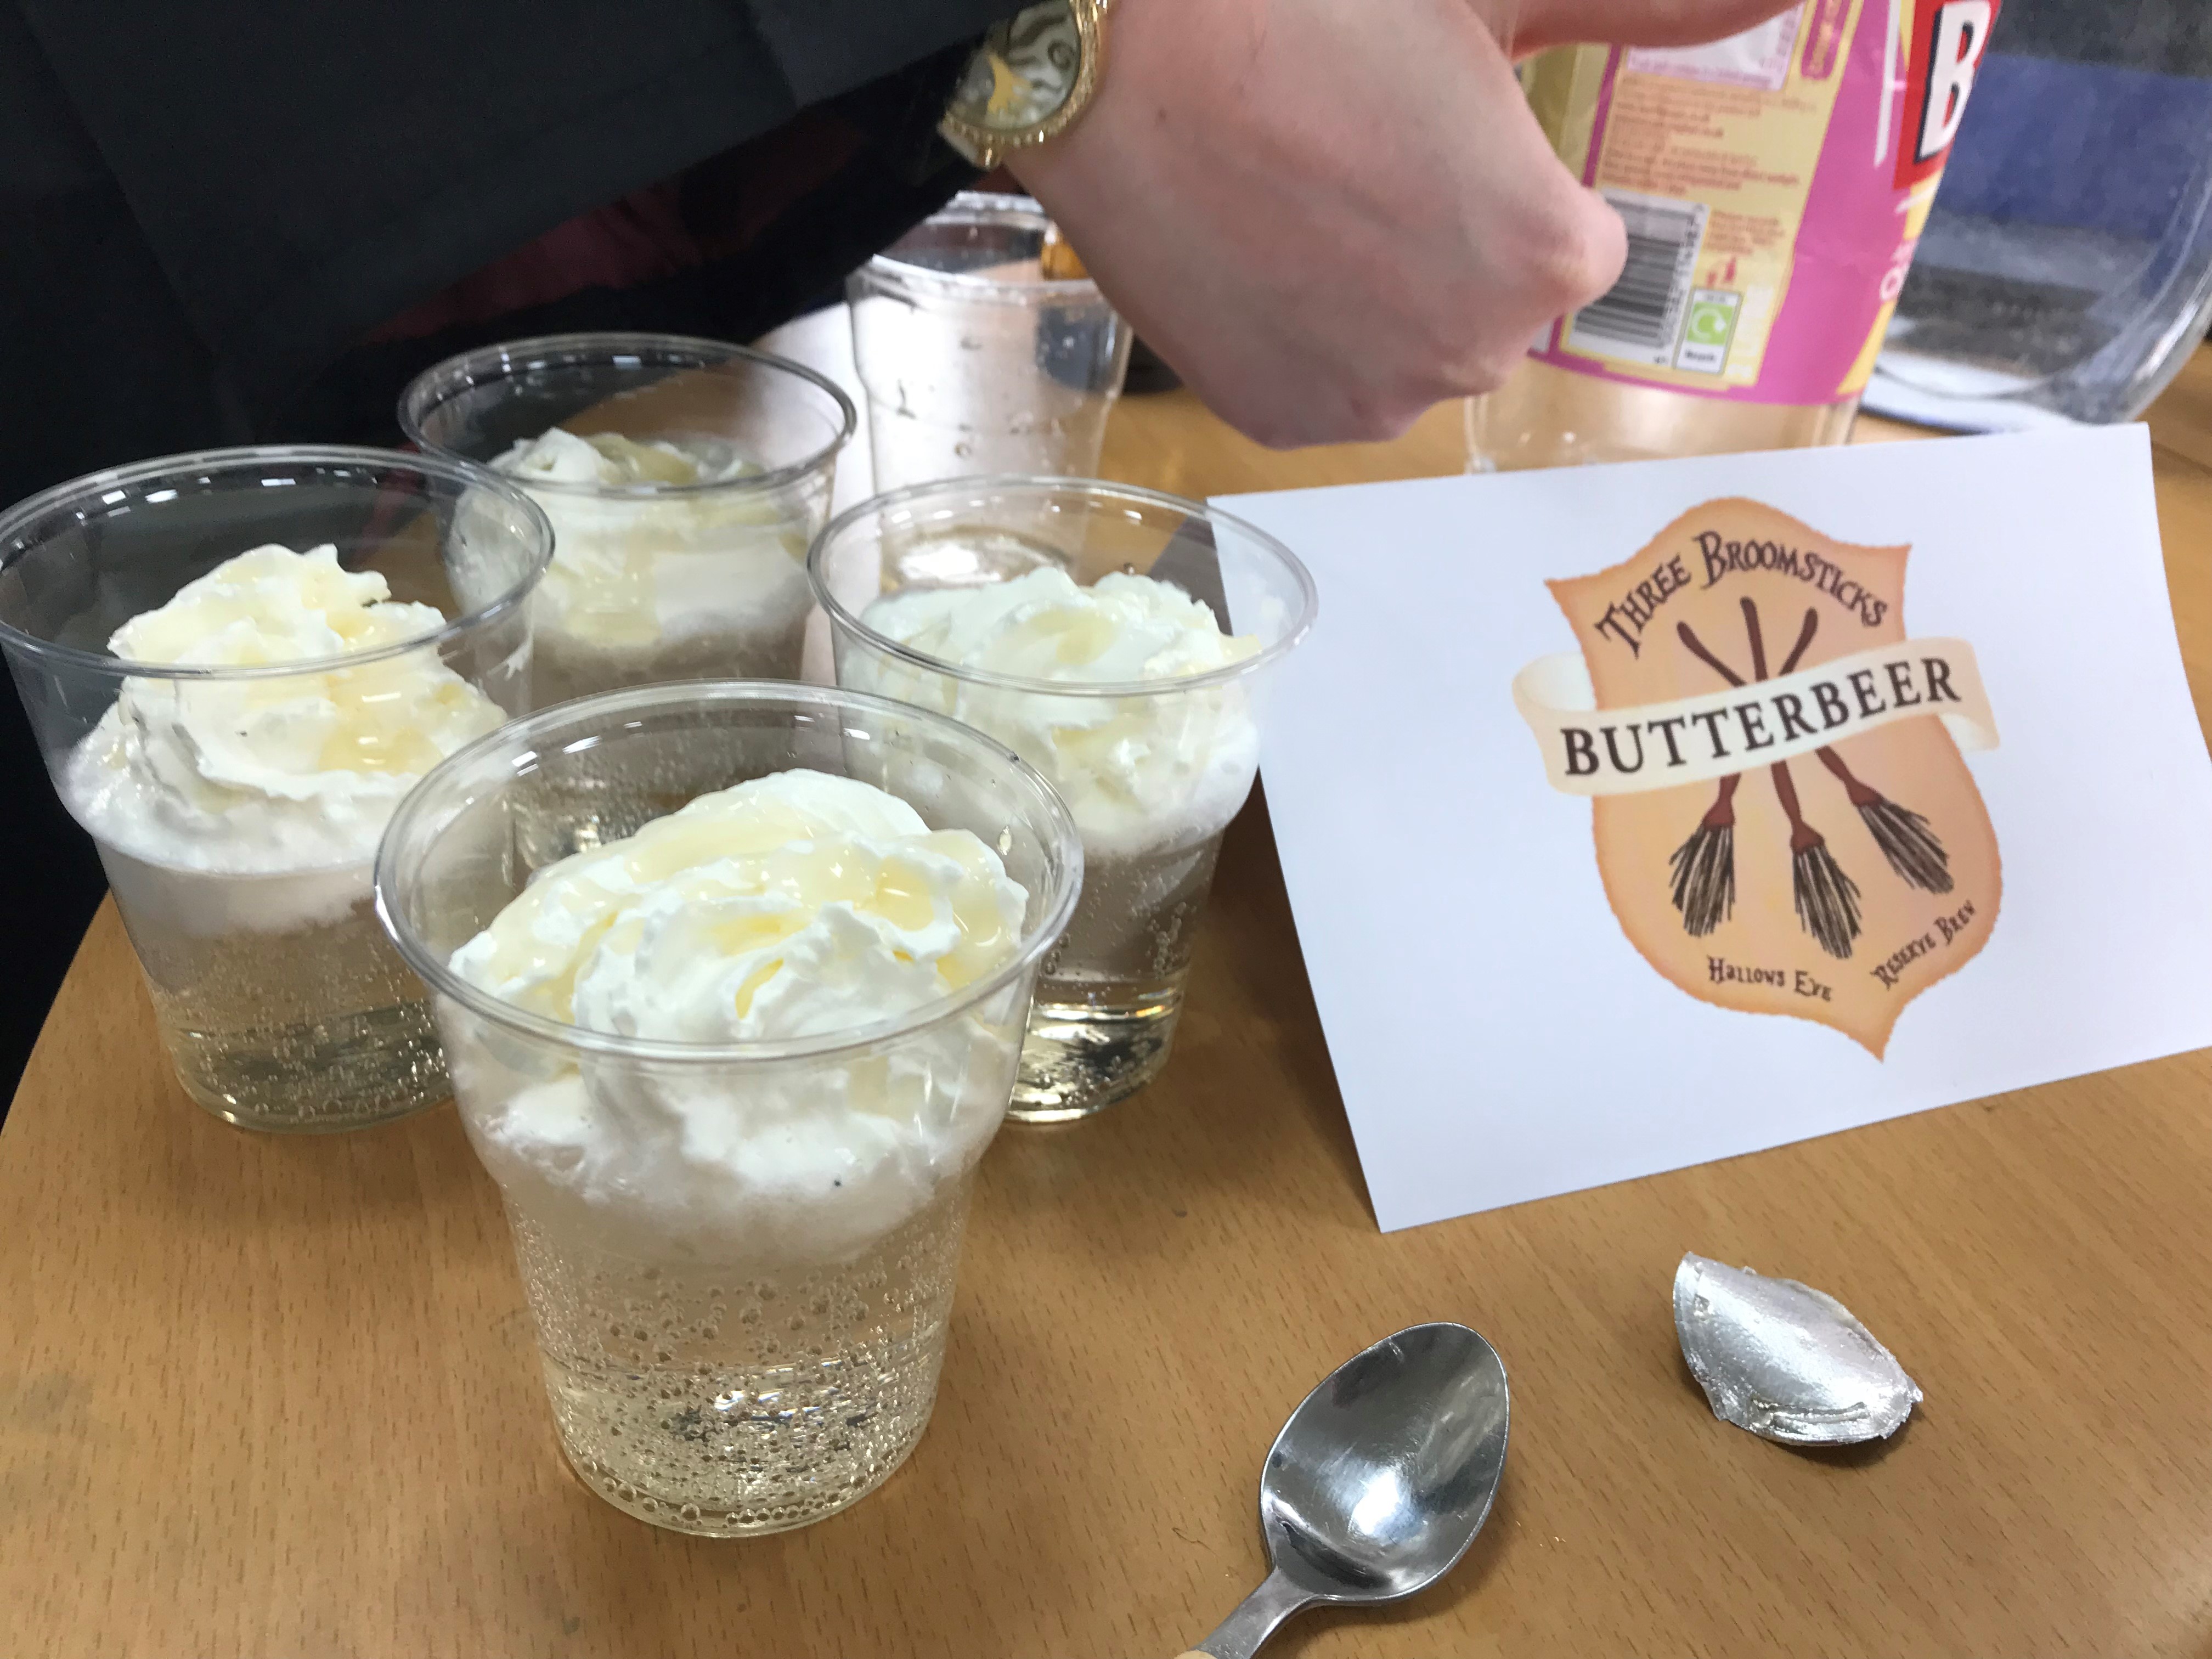 Harry Potter Day - Butter Beer